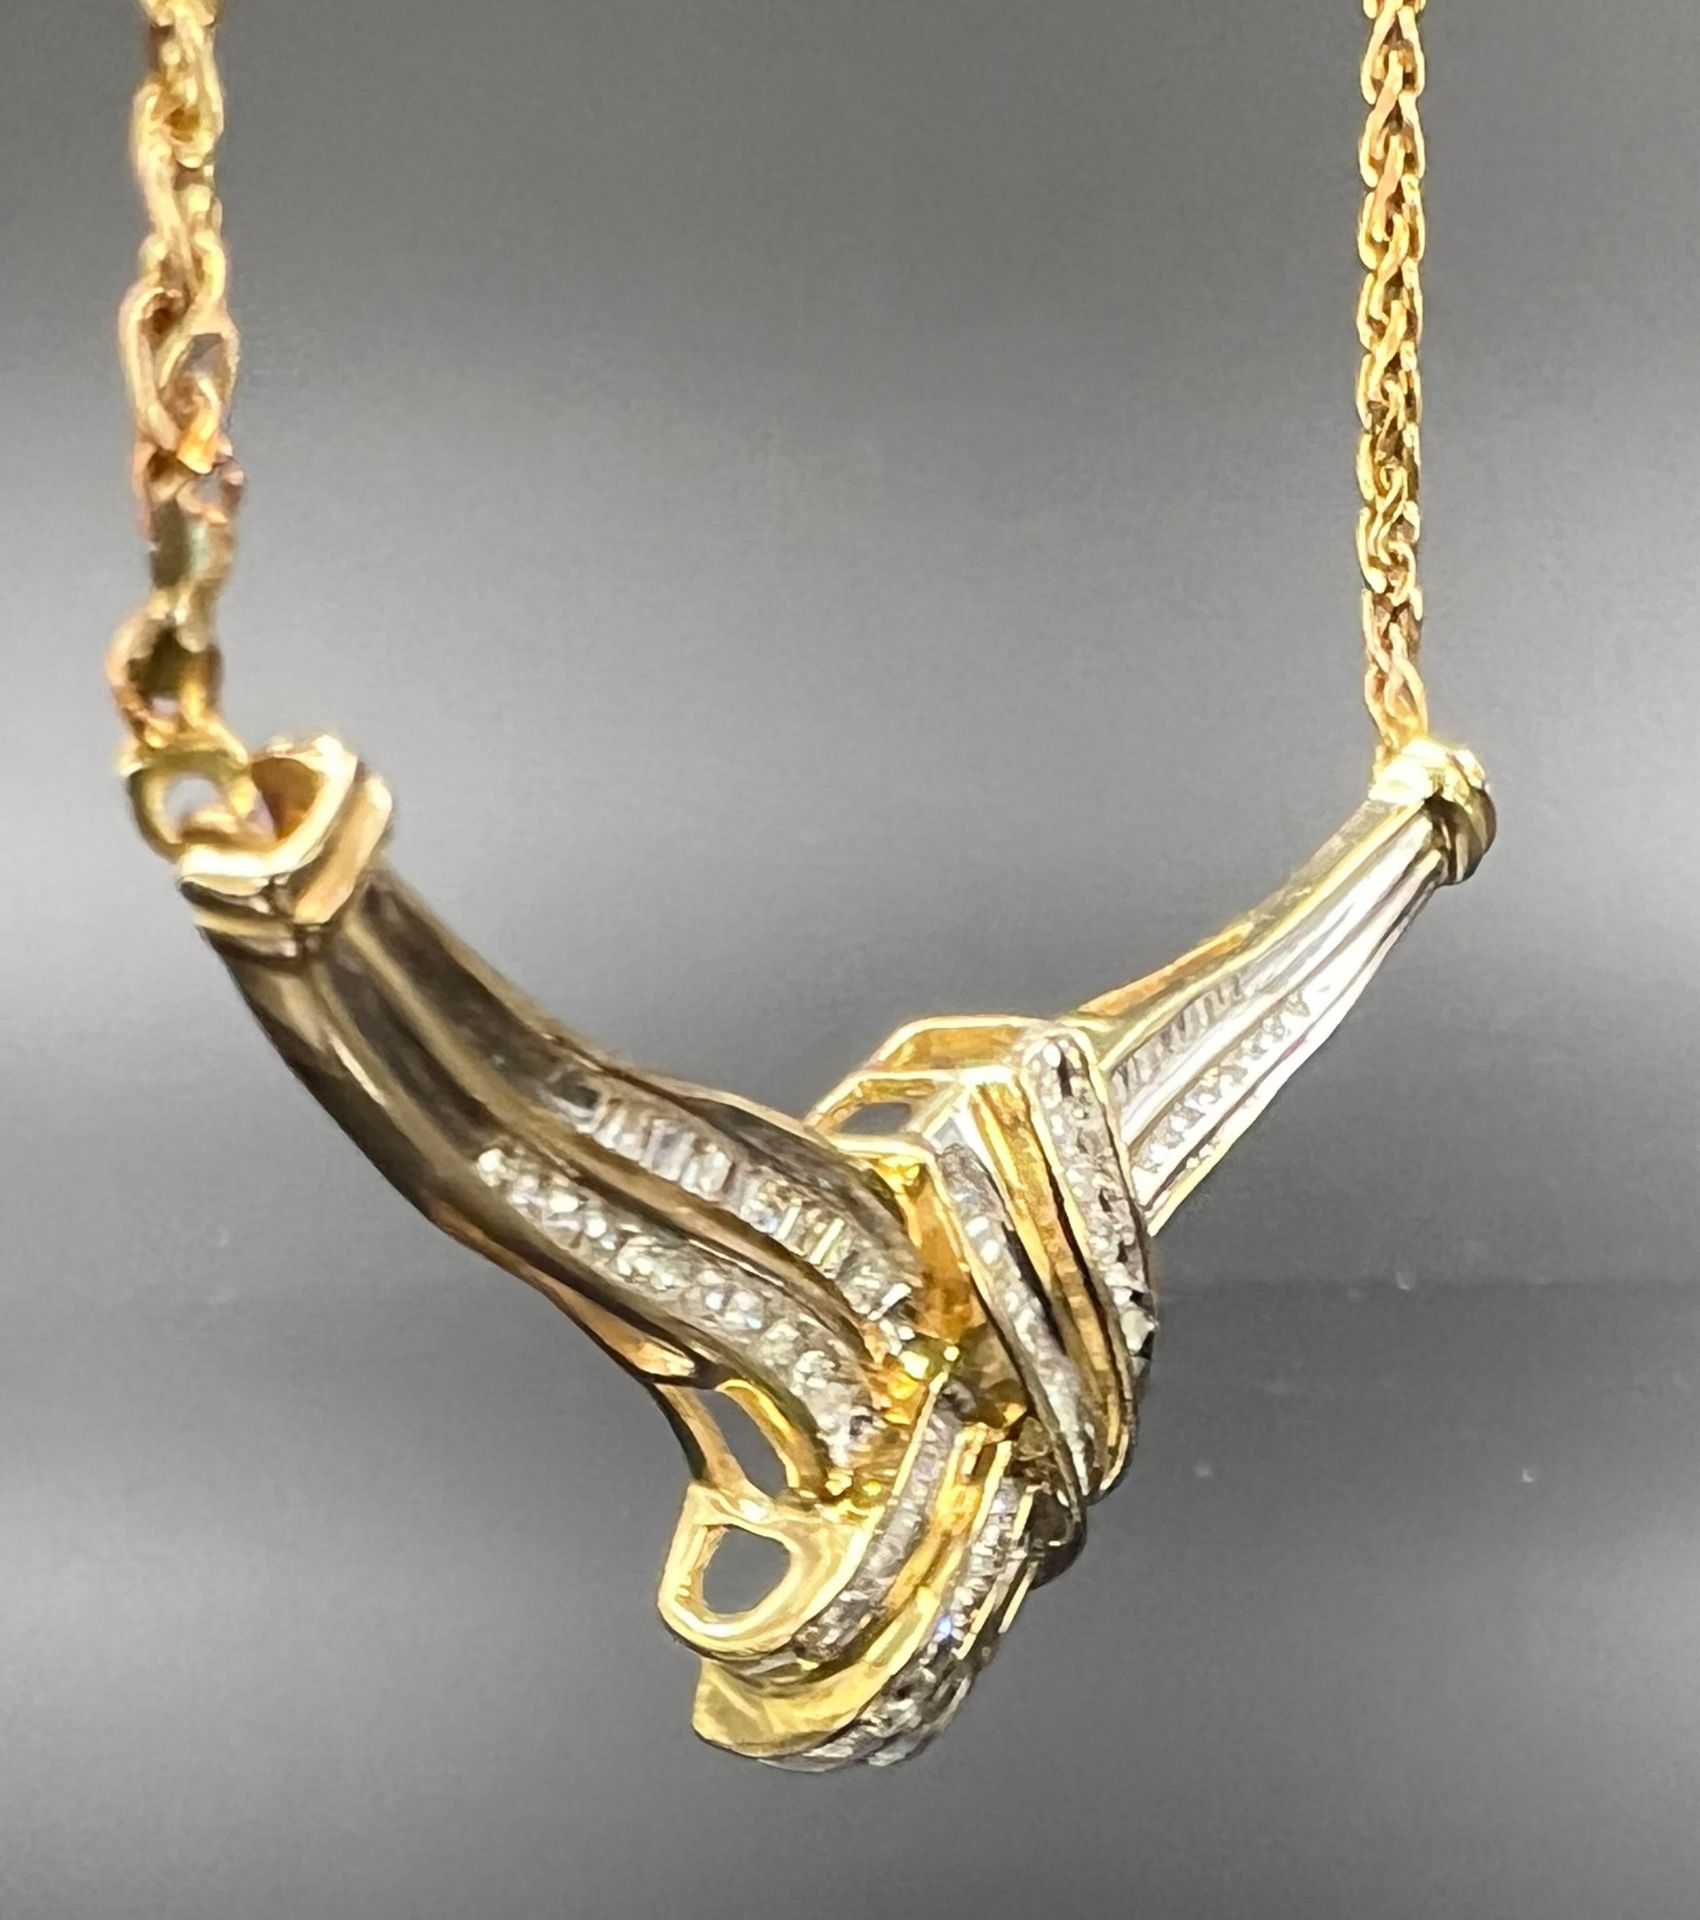 Necklace. 585 yellow gold and white gold with diamonds. - Image 3 of 10